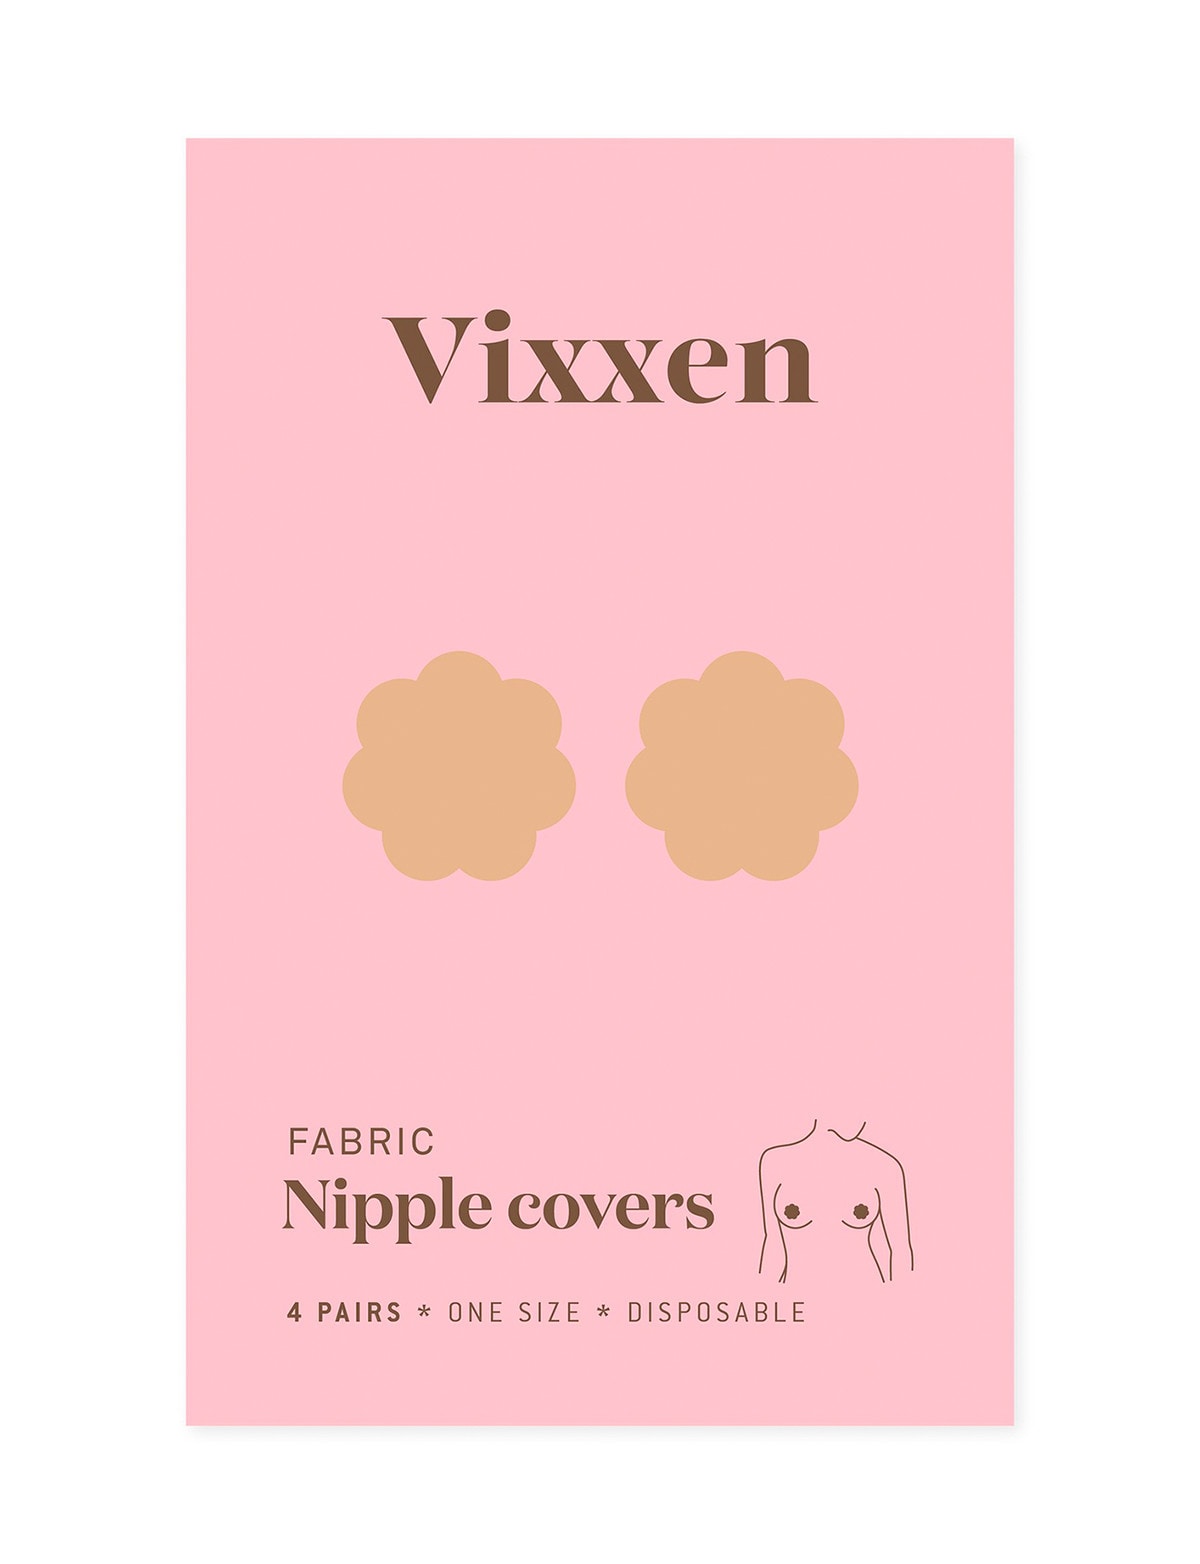 How To Identify The Best Nipple Cover For Tanning?